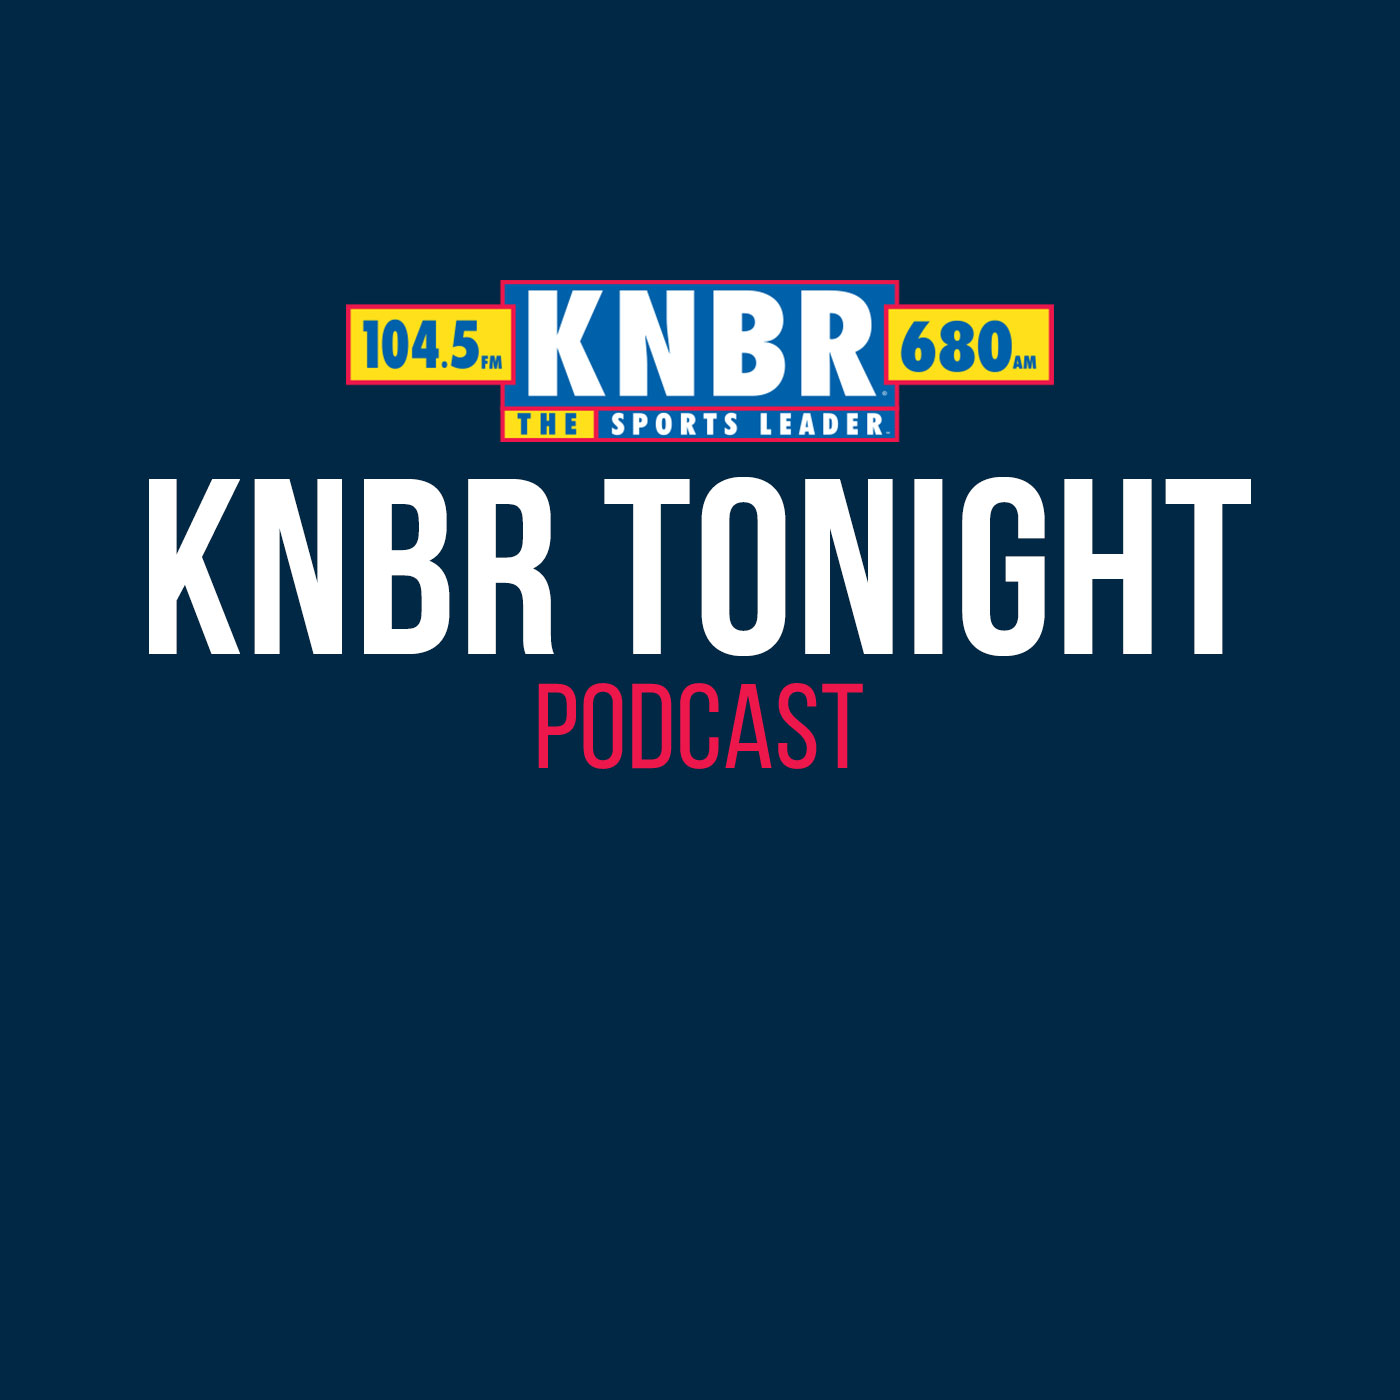 10-17 Brian Peacock joins KNBR Tonight with FP to breakdown the 49ers loss vs the Falcons